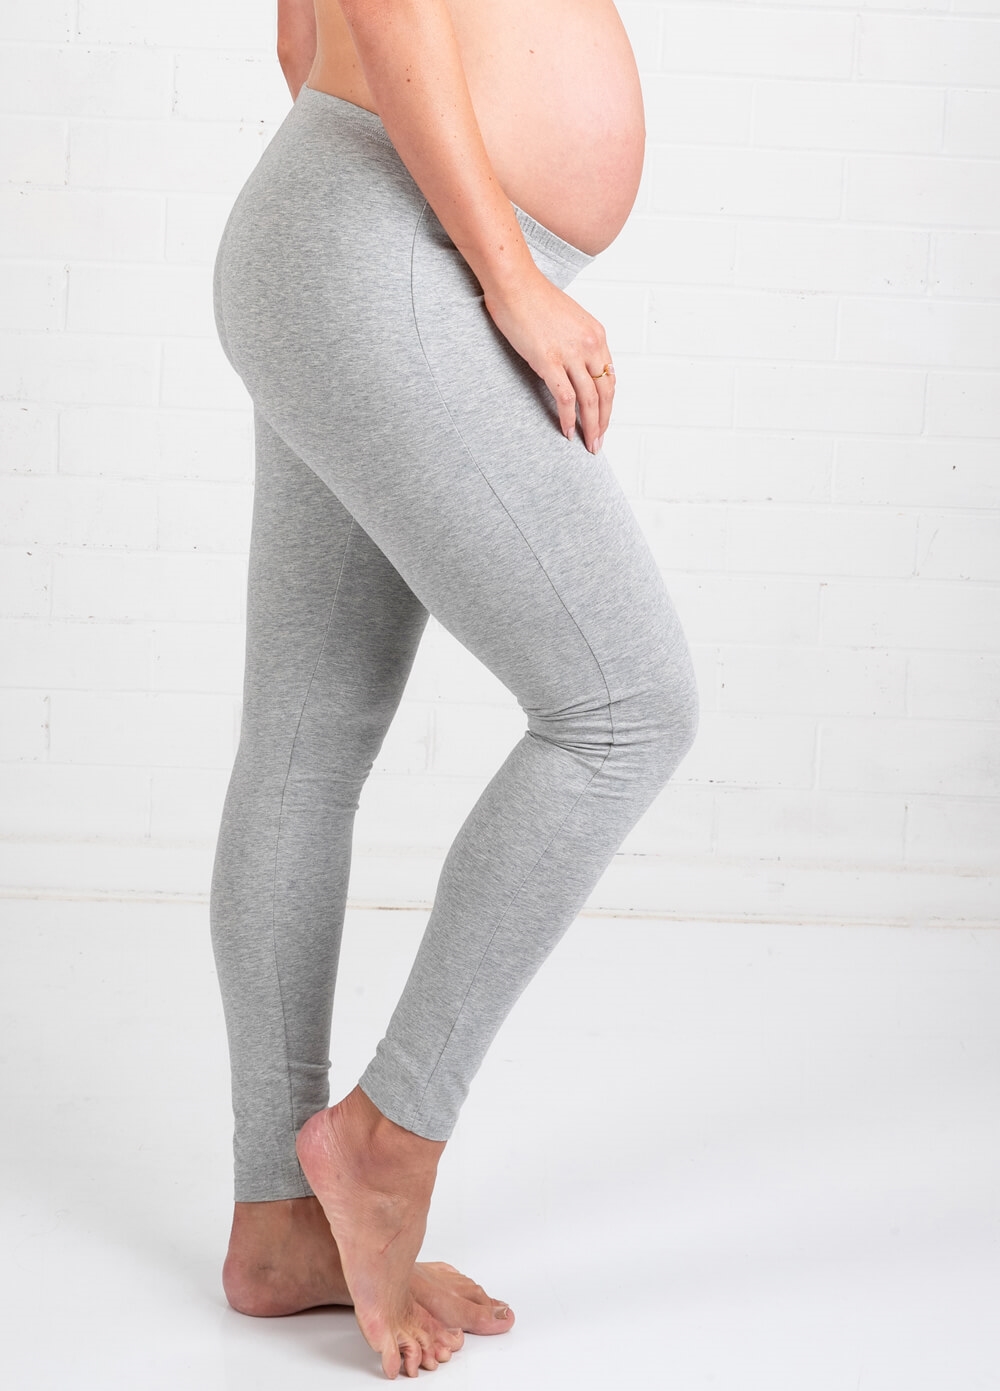 Maternity Core Tight Over Belly, Women's Lifestyle Fashion Brand